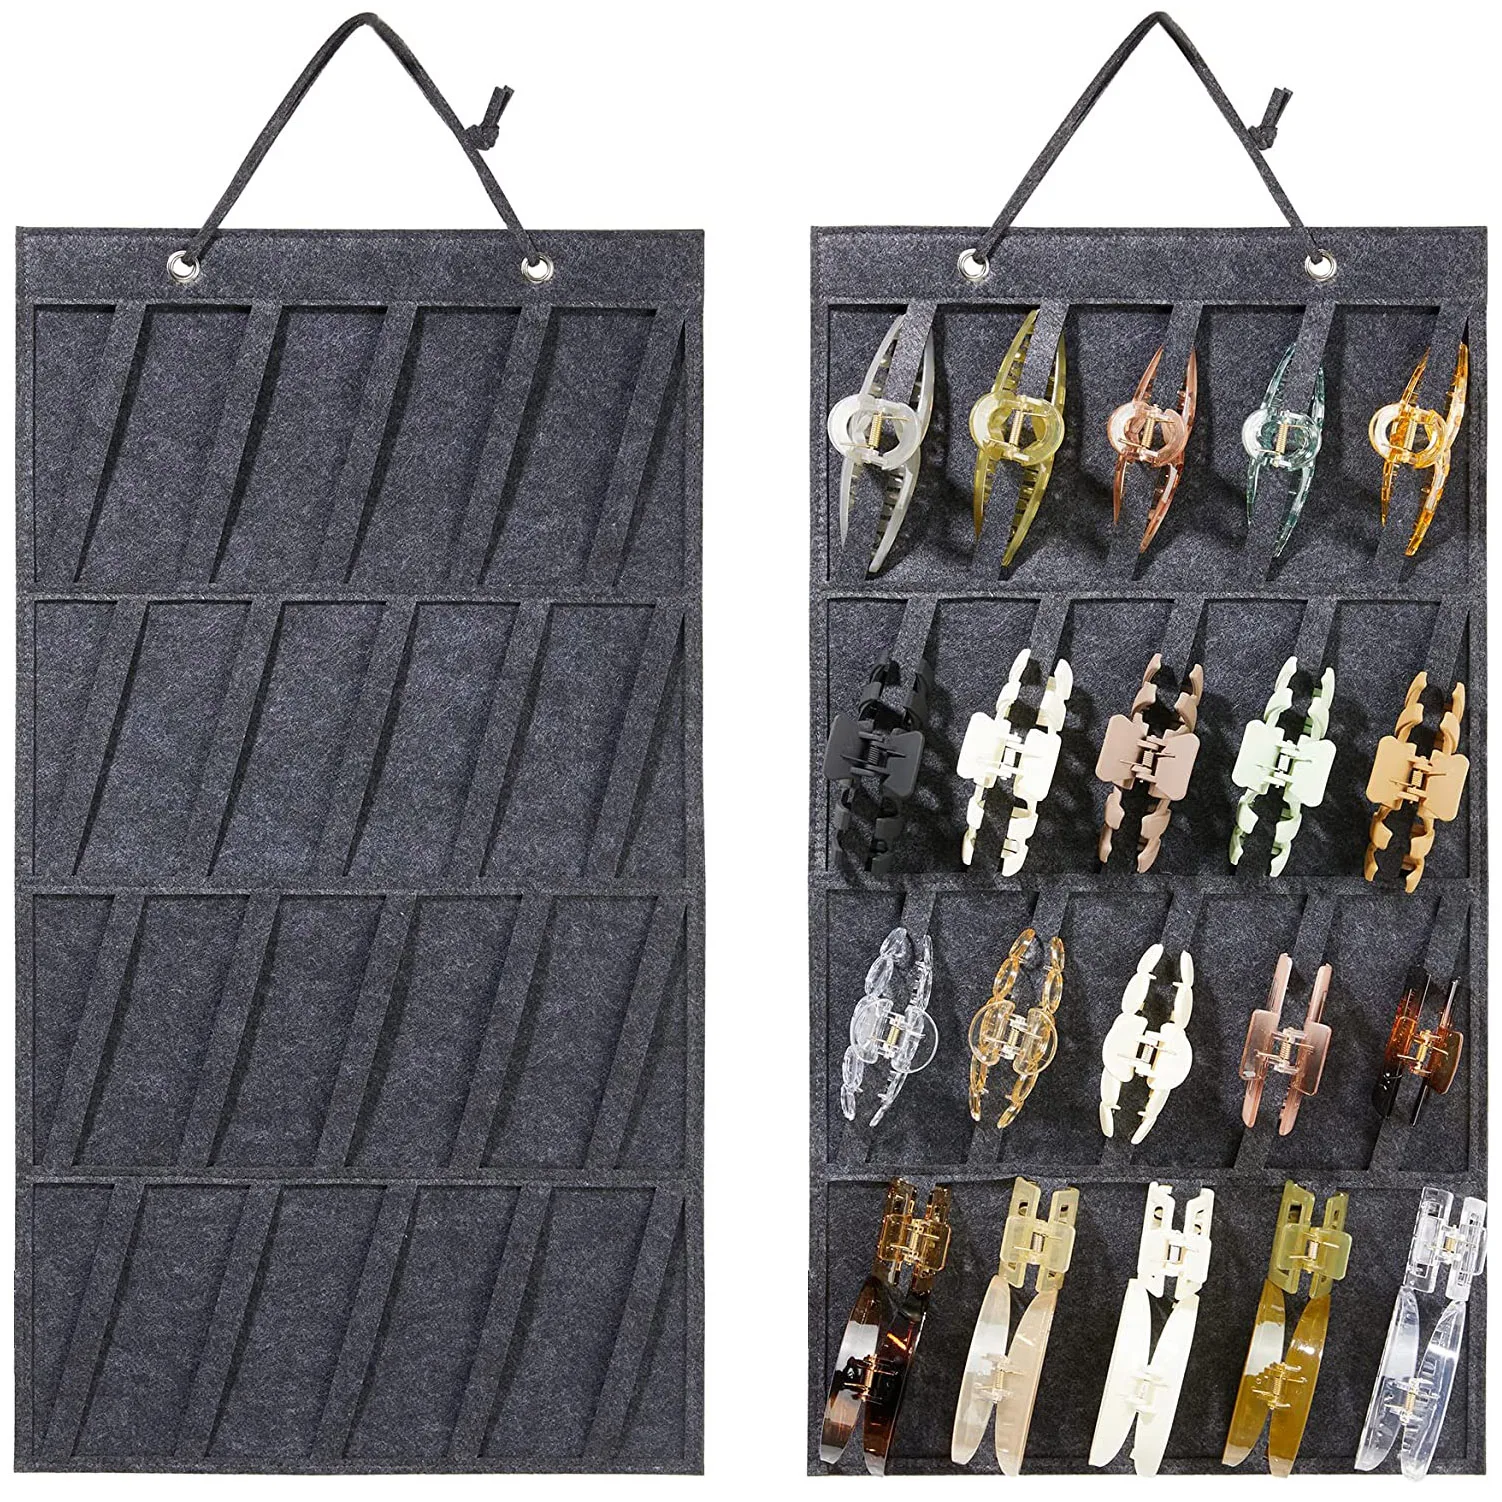 New Hair Claw Clips Organizer Hanging Wall Hair Claws Holder Organizers for Women Girls Hairpins Display Accessories Storage Bag